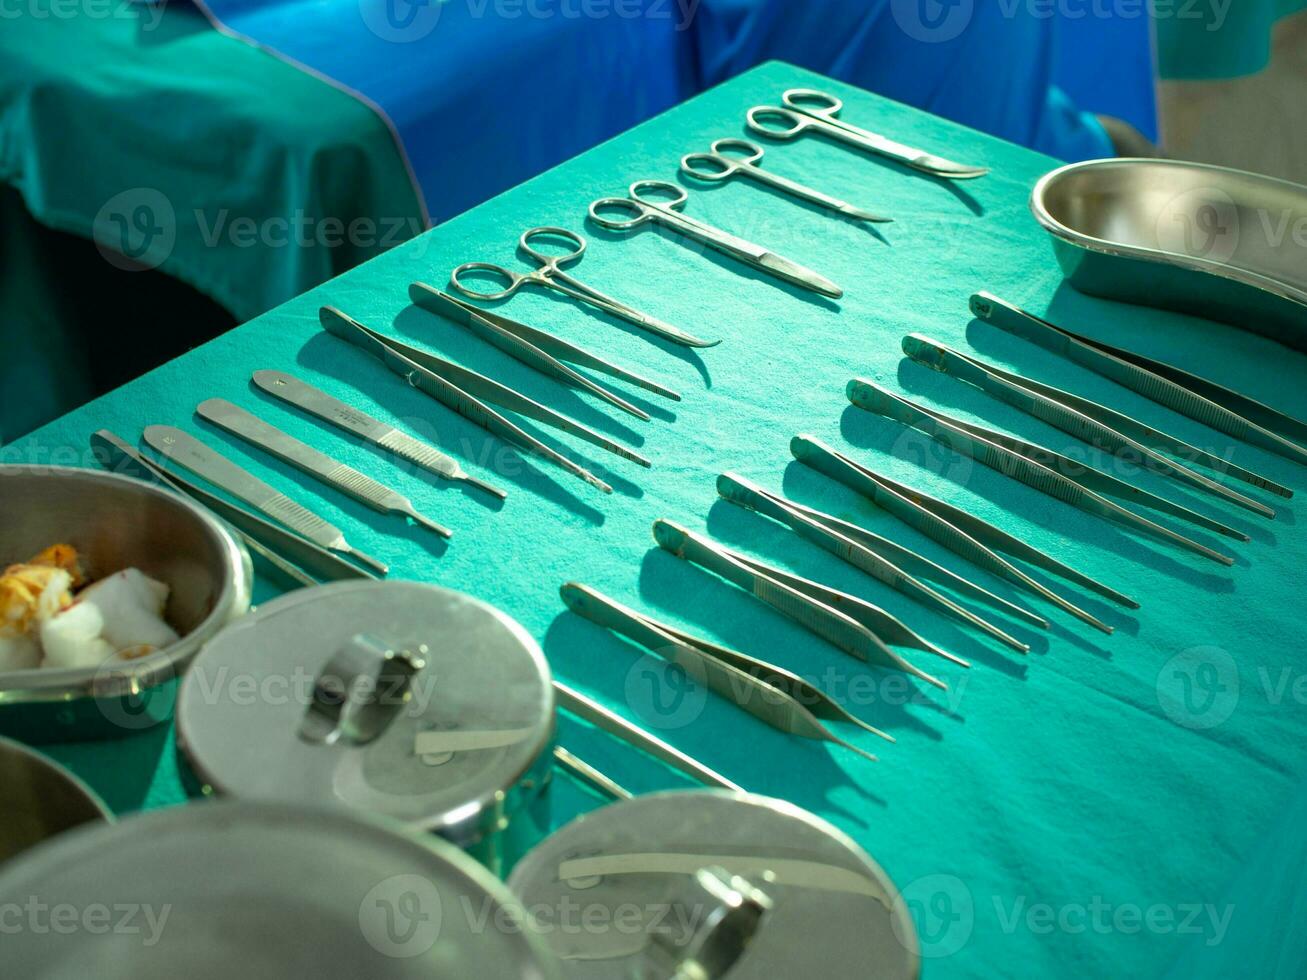 tool equipment surgeon operation room hospital clinic laboratory medical patient treatment nurse doctor staff surgical sterile specialist procedure technology scissors clean work occupation surgical photo